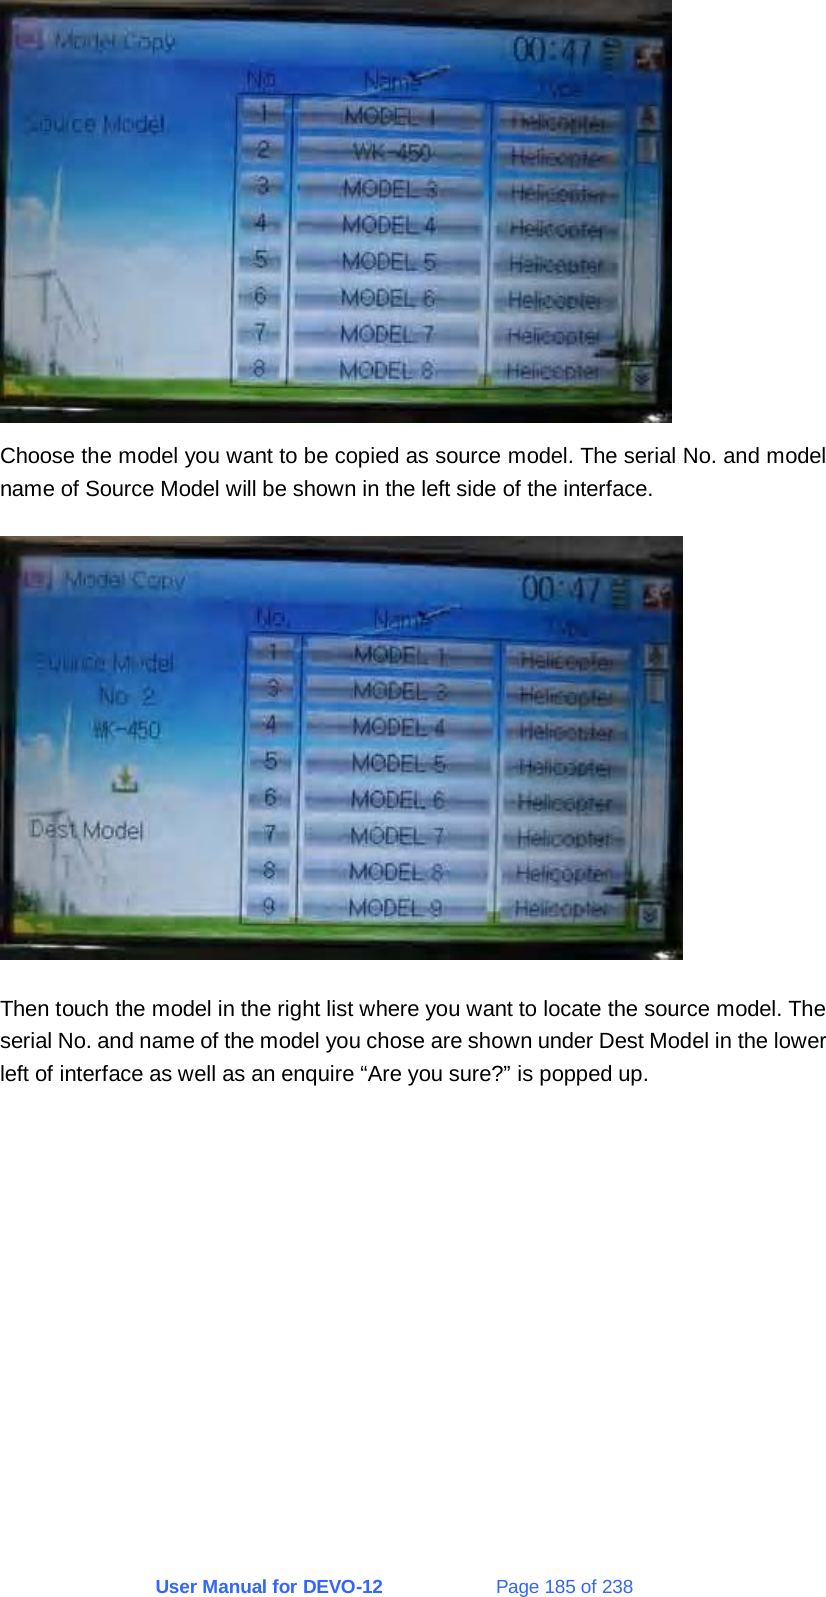 User Manual for DEVO-12             Page 185 of 238  Choose the model you want to be copied as source model. The serial No. and model name of Source Model will be shown in the left side of the interface.  Then touch the model in the right list where you want to locate the source model. The serial No. and name of the model you chose are shown under Dest Model in the lower left of interface as well as an enquire “Are you sure?” is popped up.  